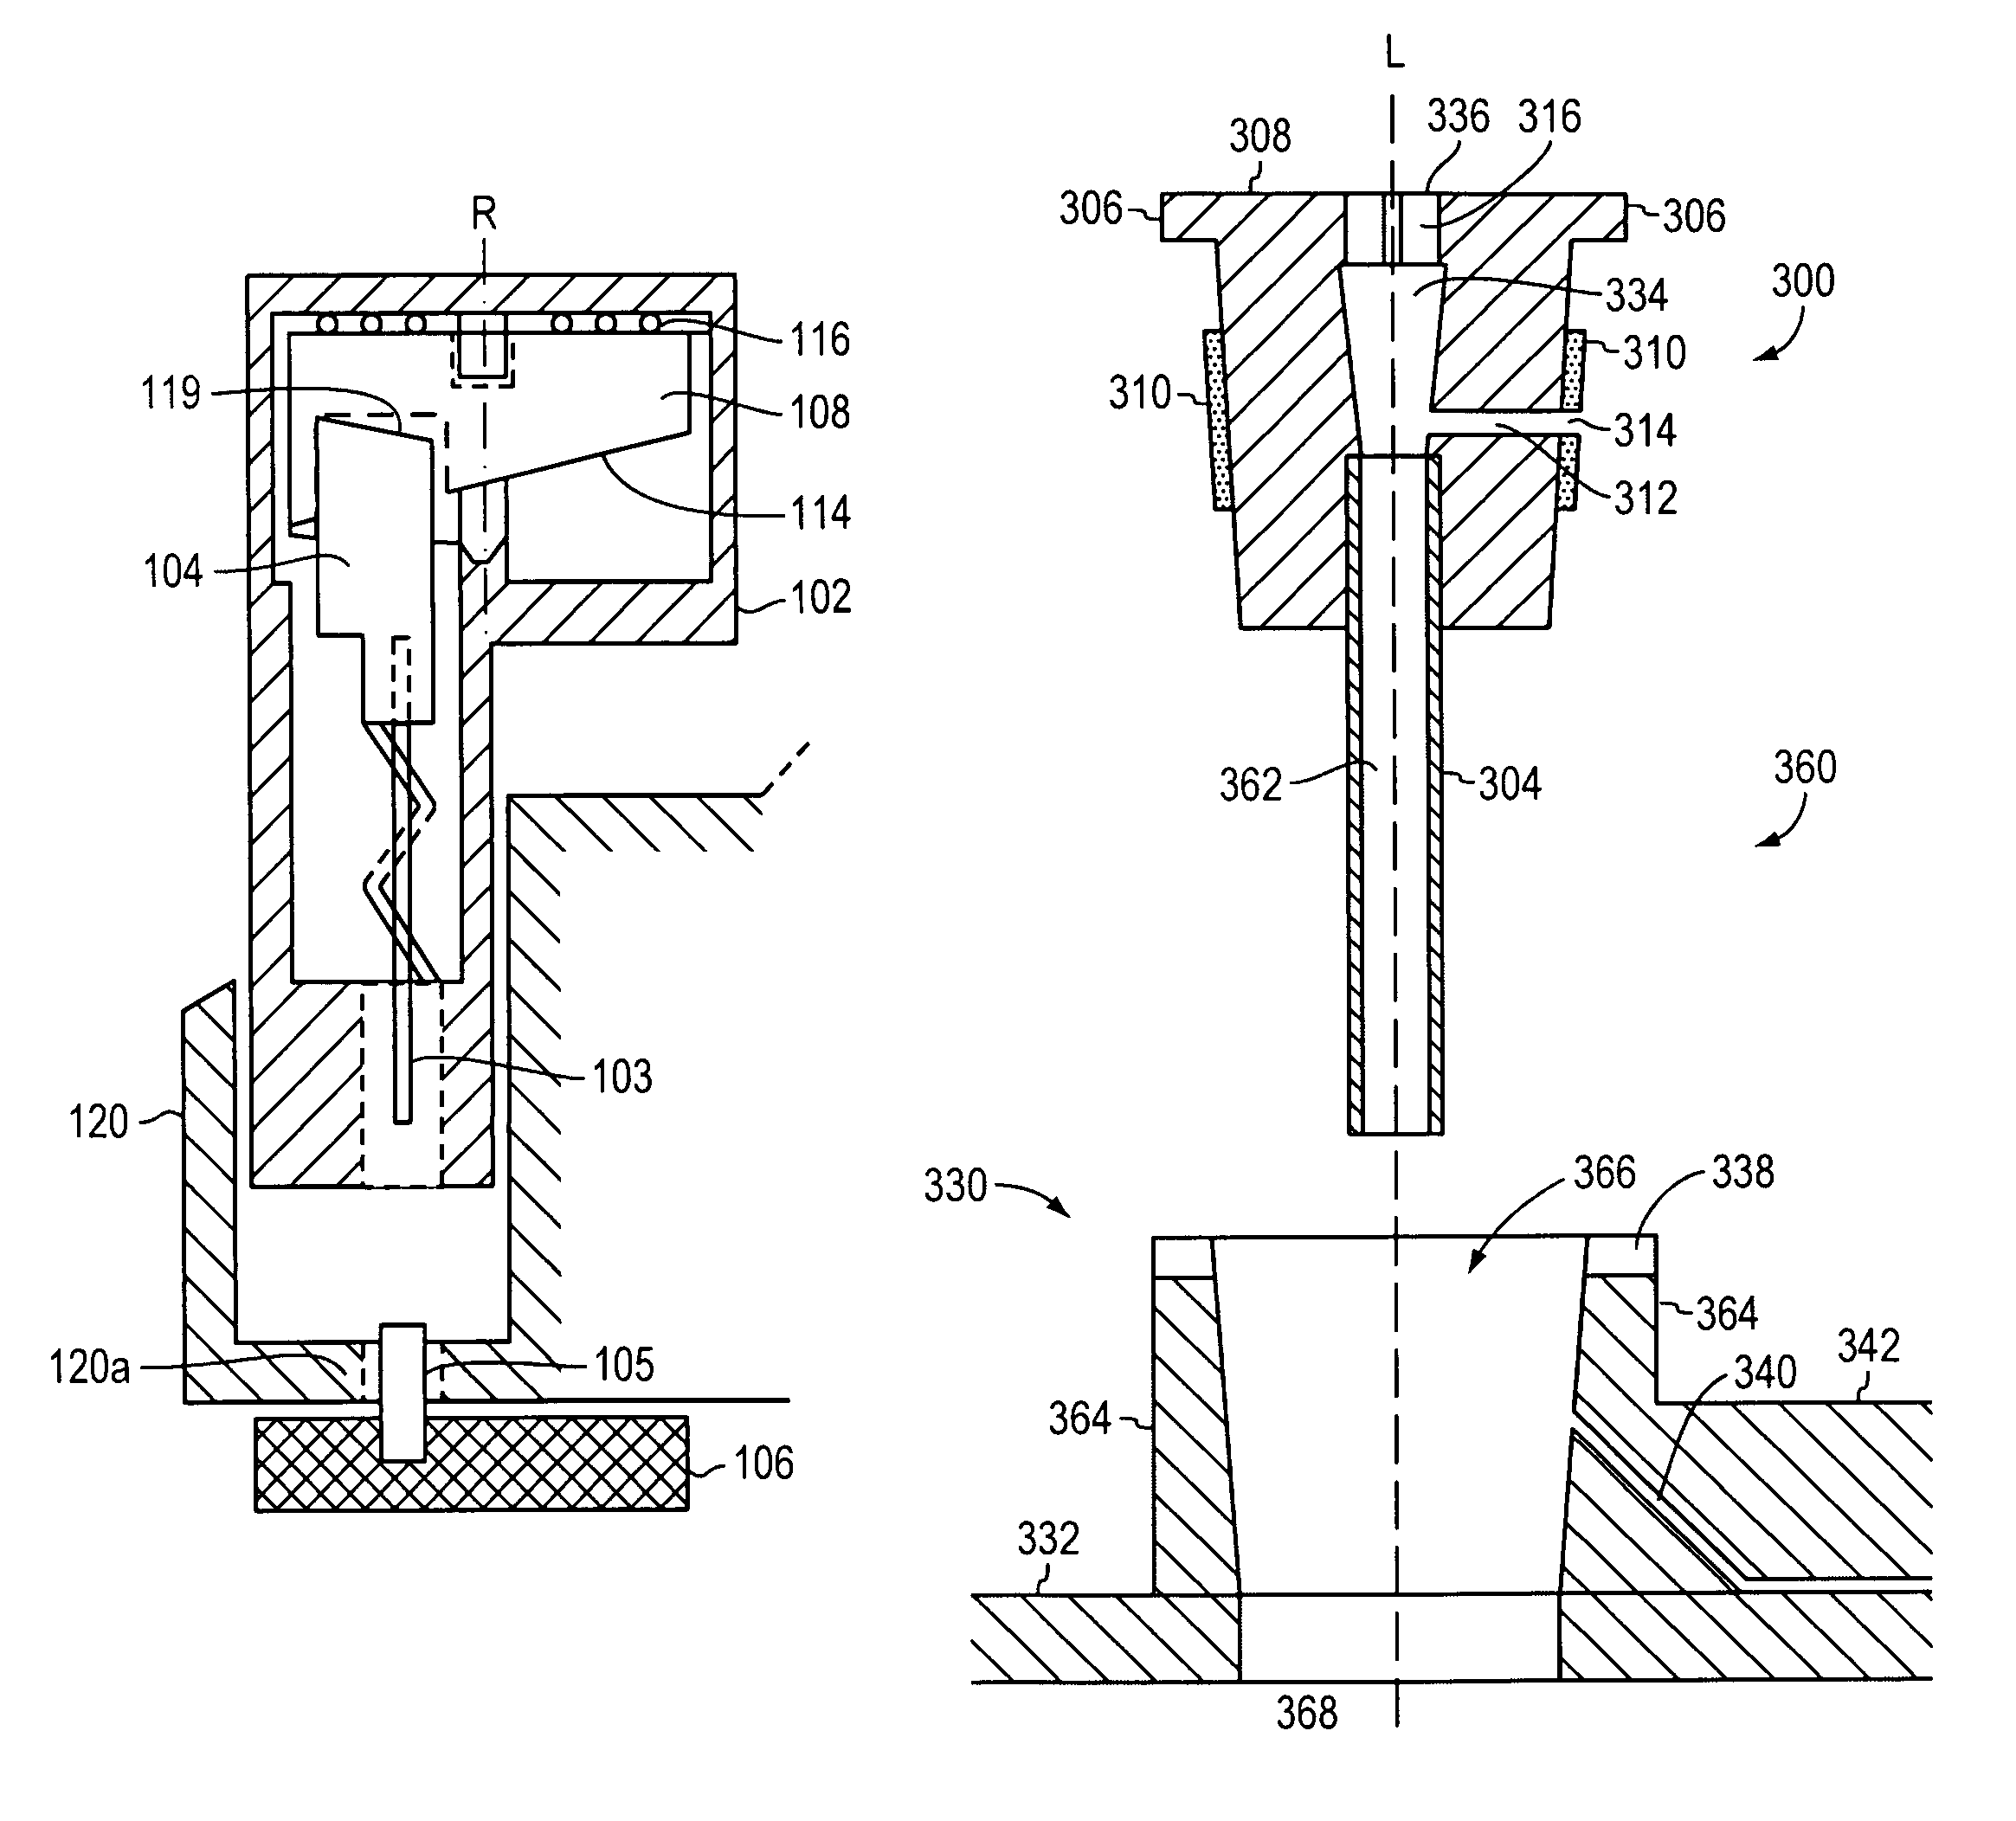 Cannula insertion device and related methods